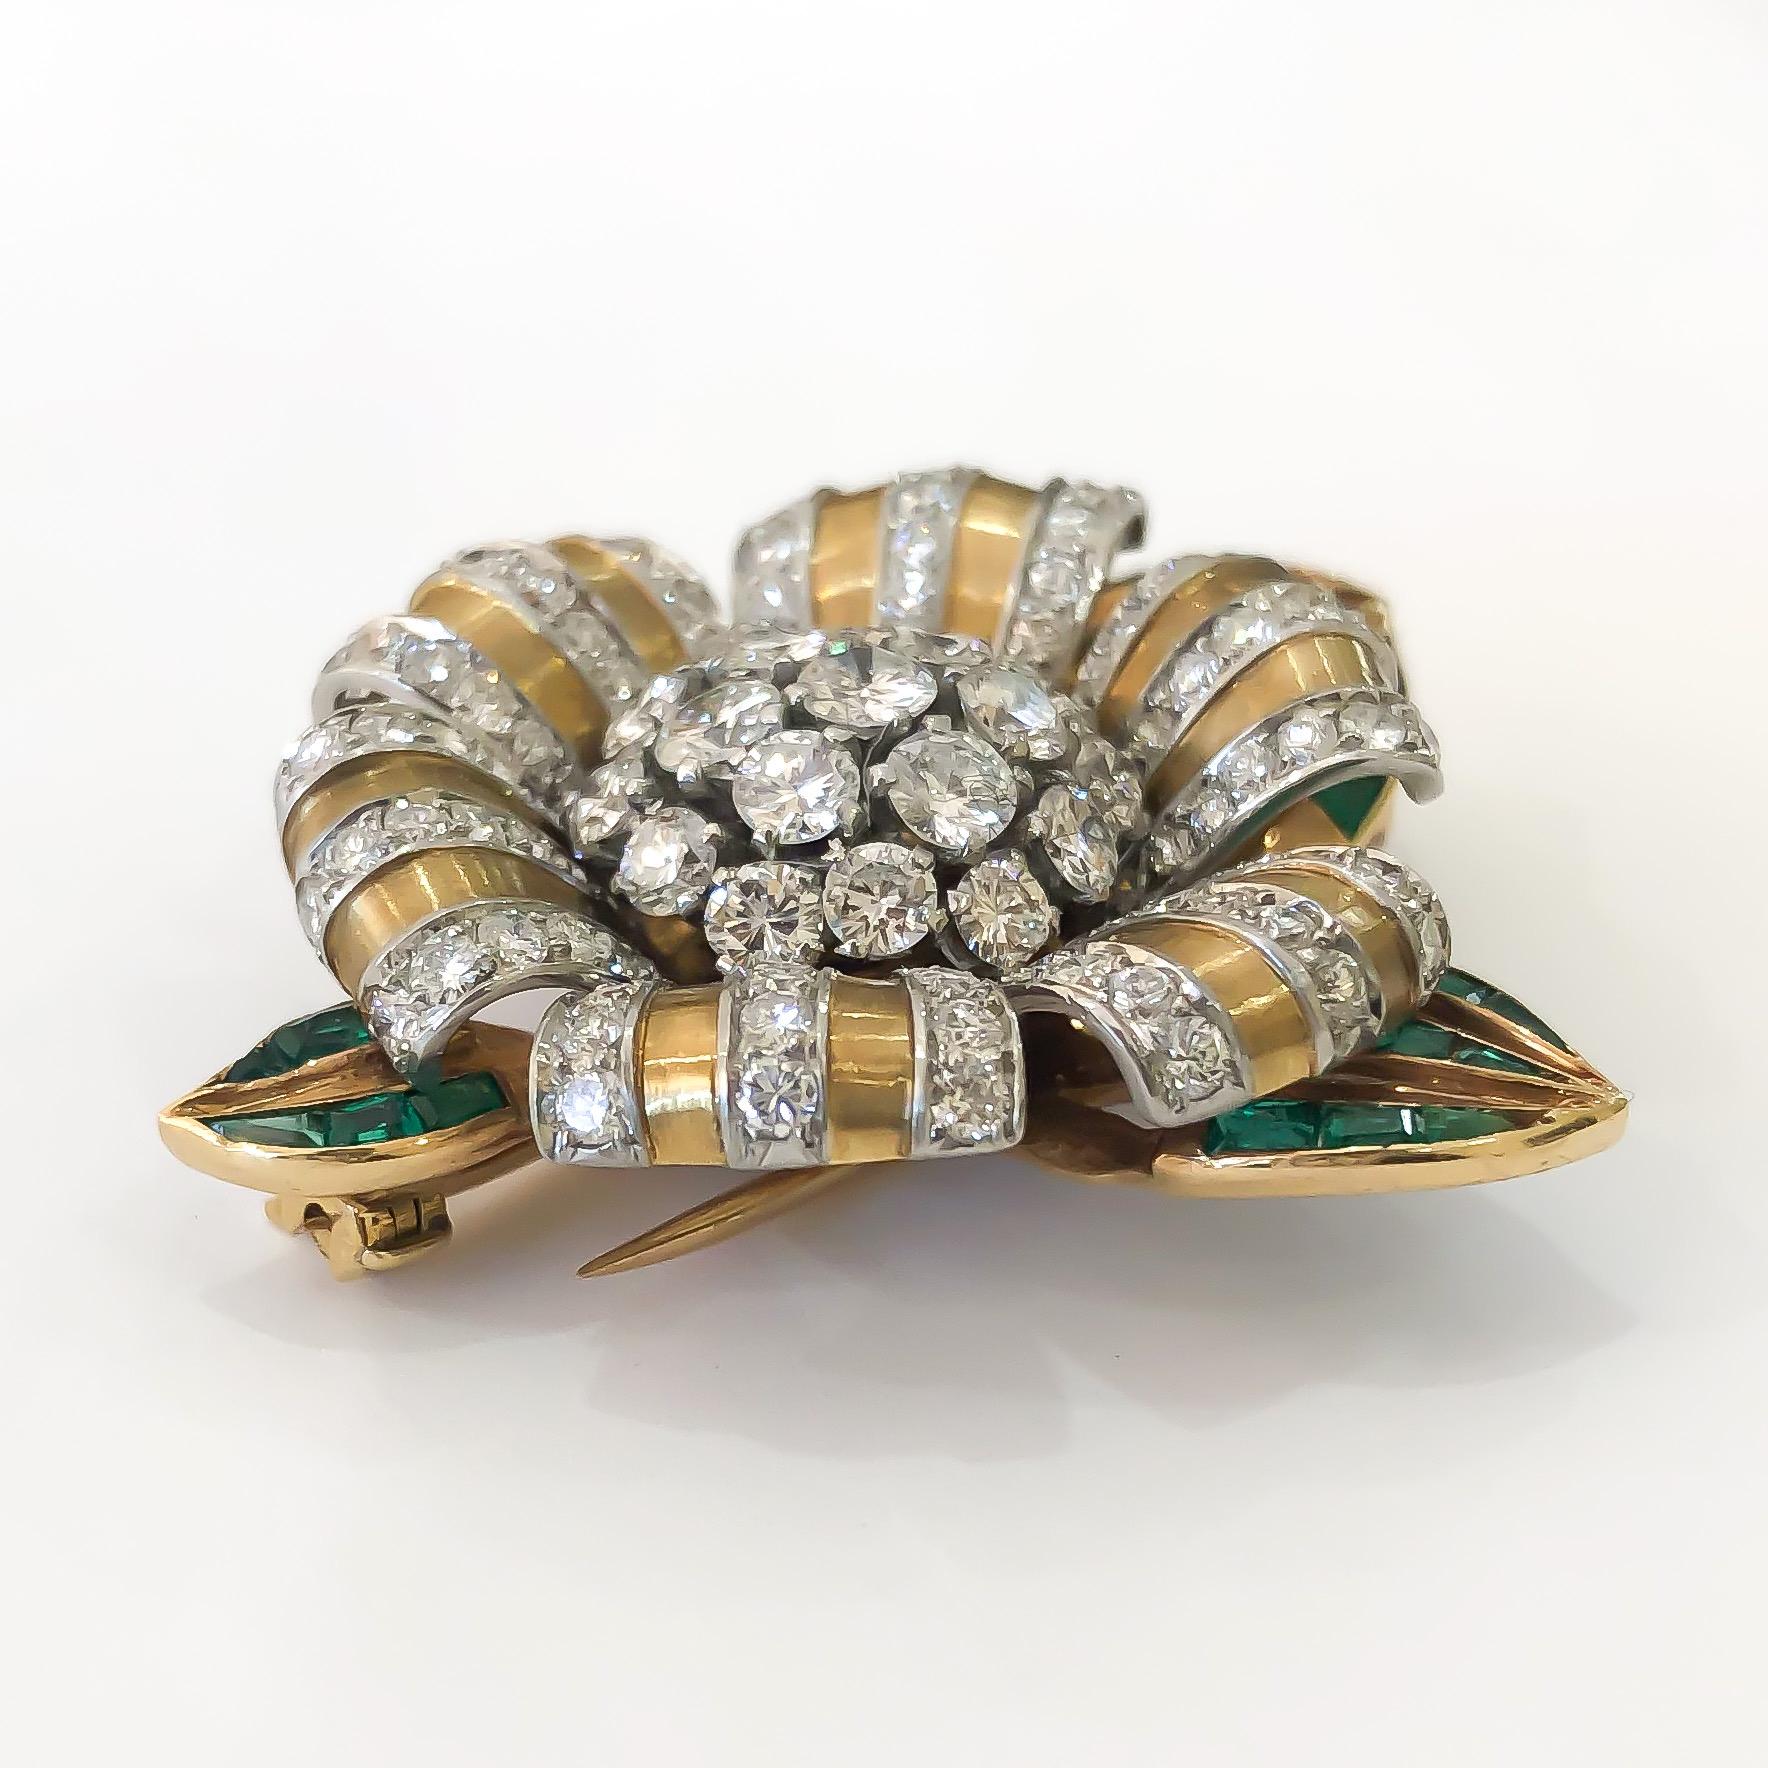 Beautiful vintage estate brooch by designer Van Cleef & Arpels. Crafted from premium 18 karat yellow gold and Platinum, and set with fine quality round brilliant cut diamonds and intense natural emeralds. The brooch is a flower ribbon motif